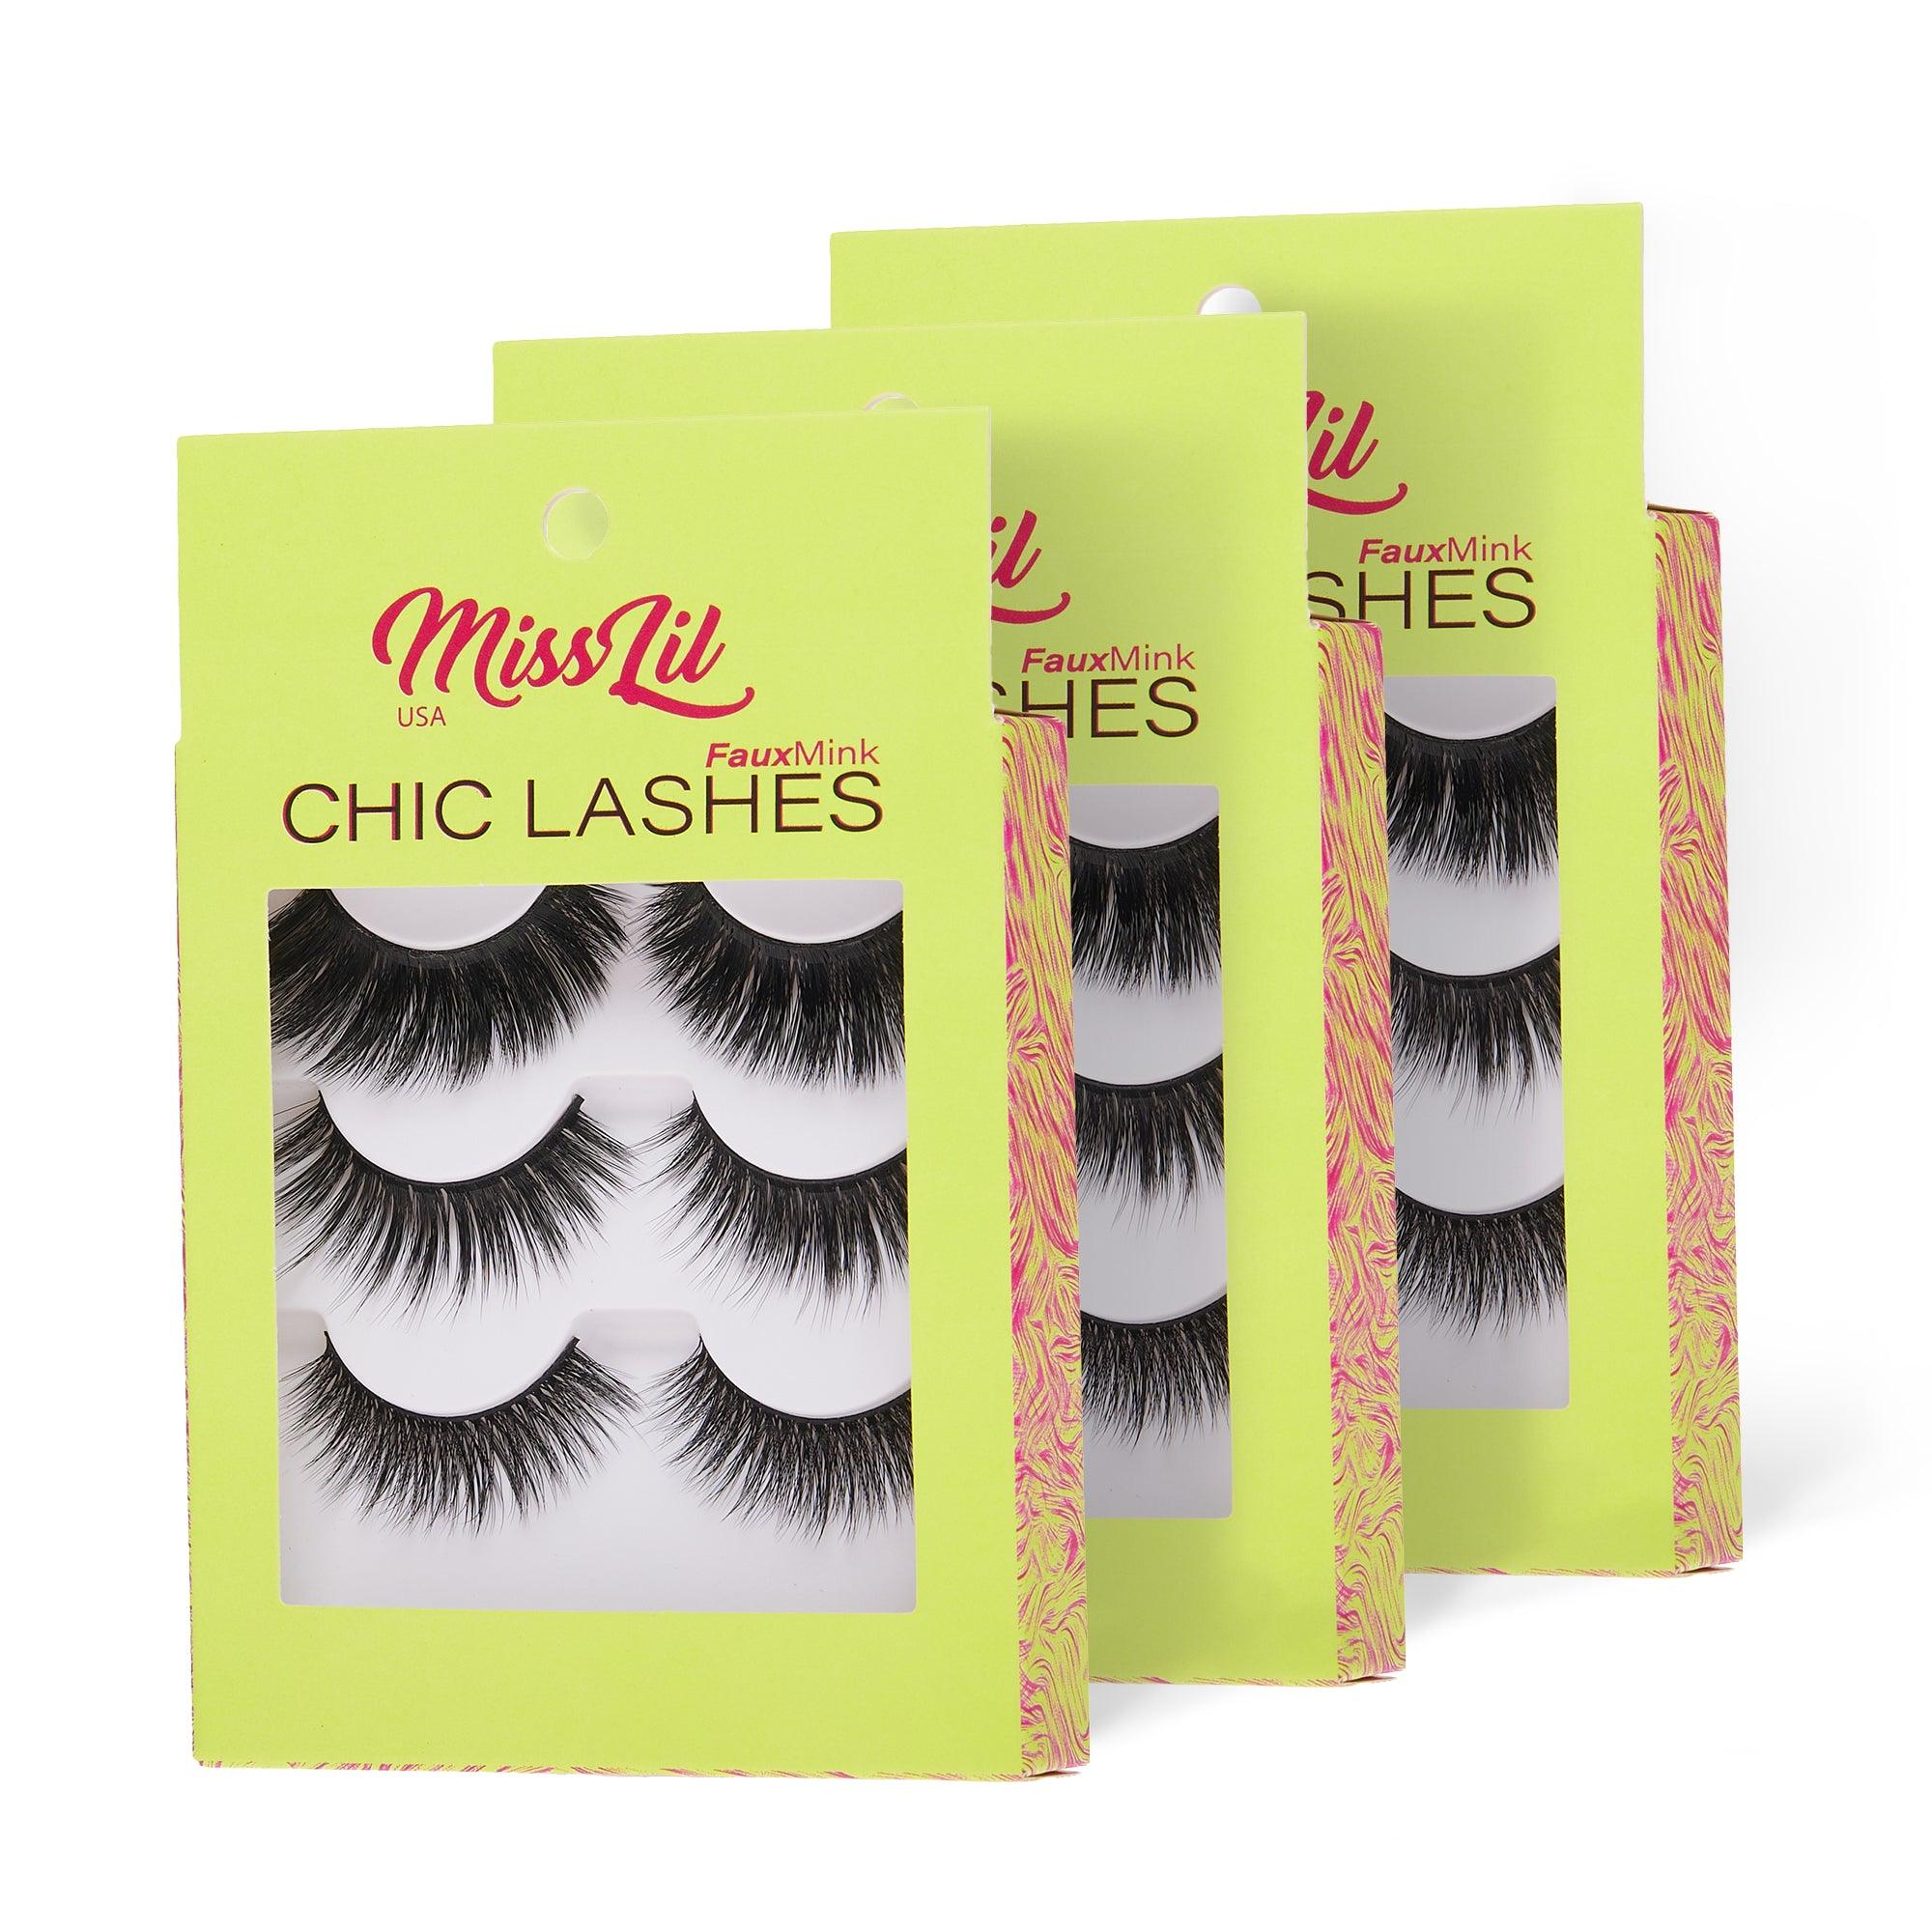 3-Pair Faux Mink Eyelashes - Chic Lashes Collection #15 - Pack of 3 - Miss Lil USA